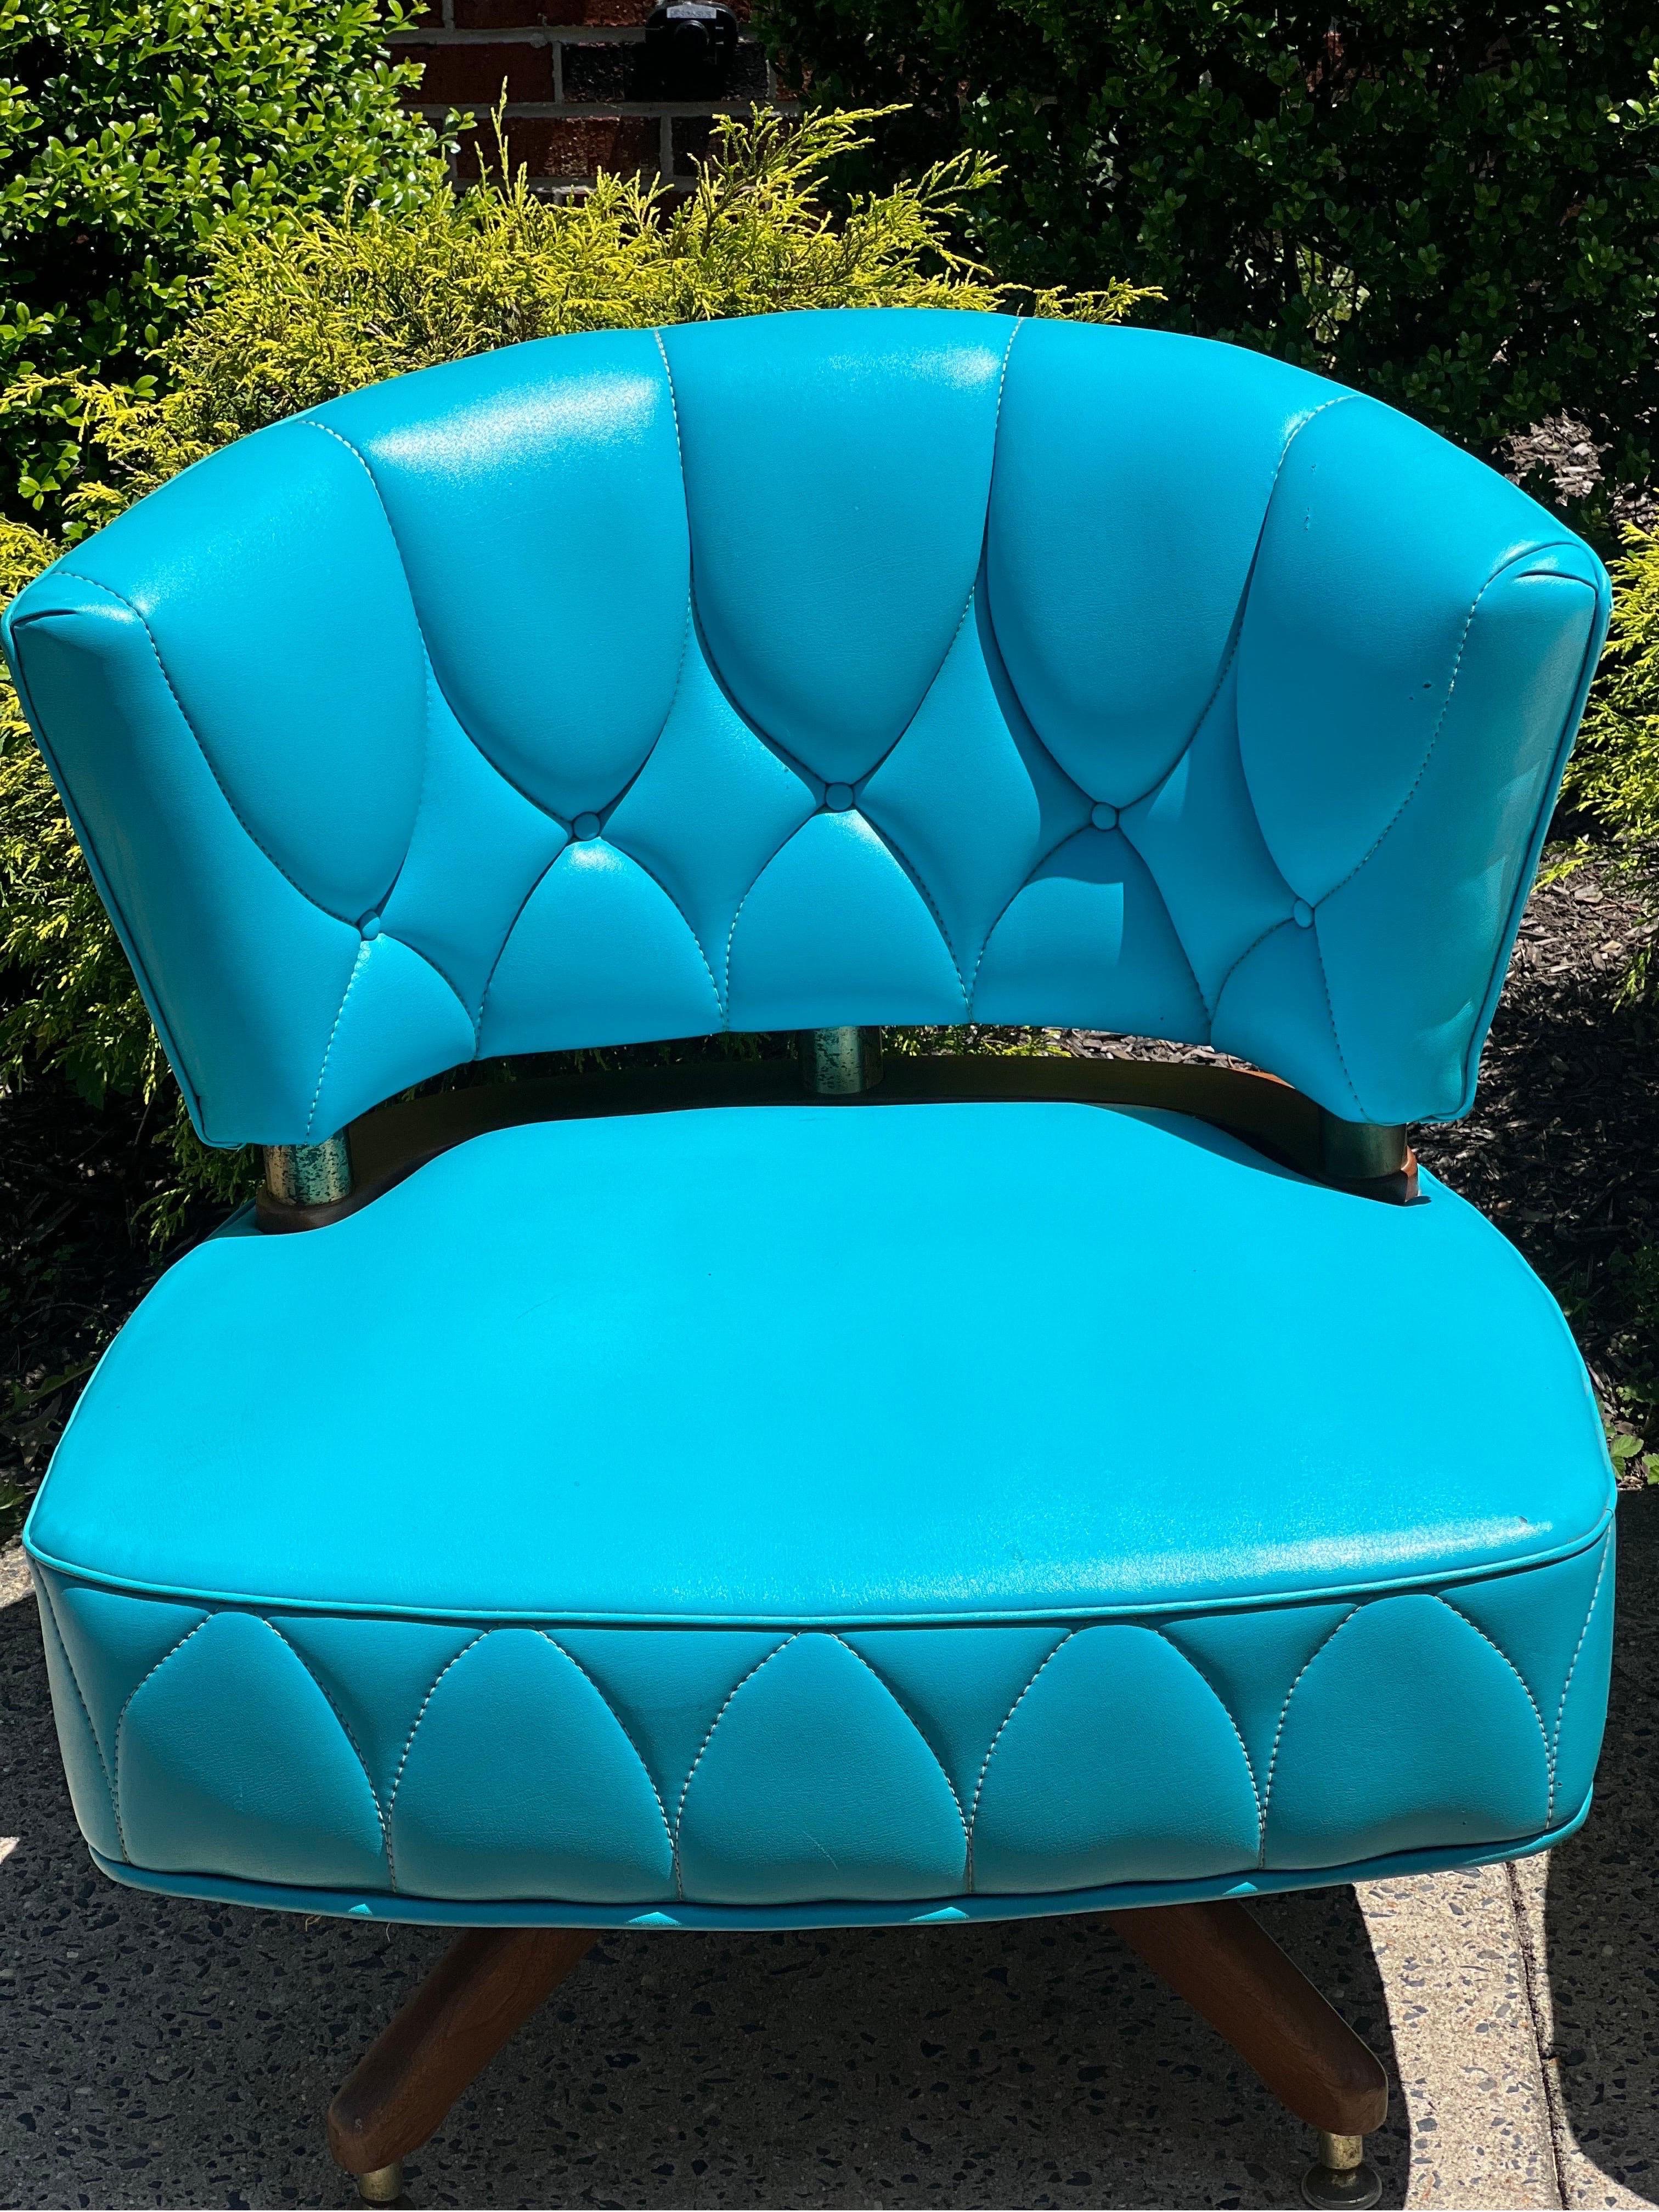 Kroehler Swivel Slipper Chairs, 1962 In Good Condition For Sale In Doylestown, PA